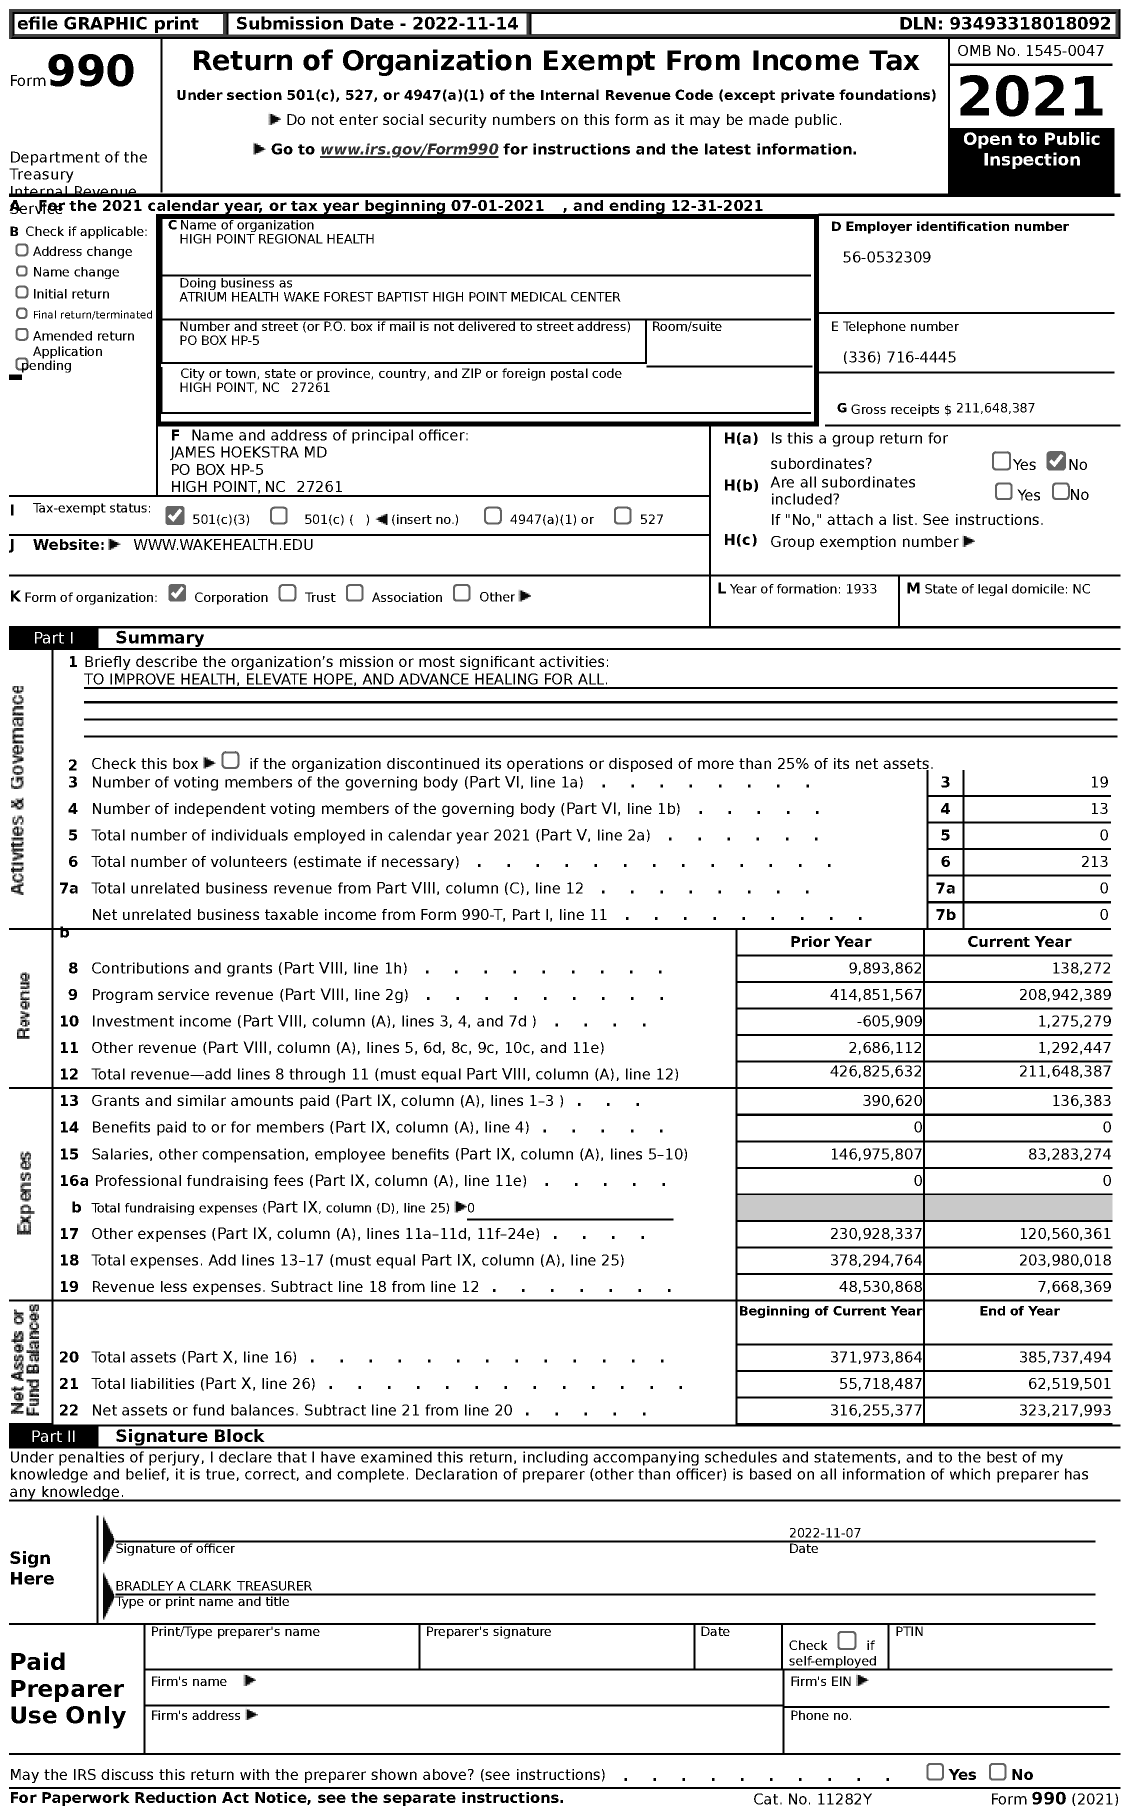 Image of first page of 2021 Form 990 for Atrium Health Wake Forest Baptist High Point Medical Center